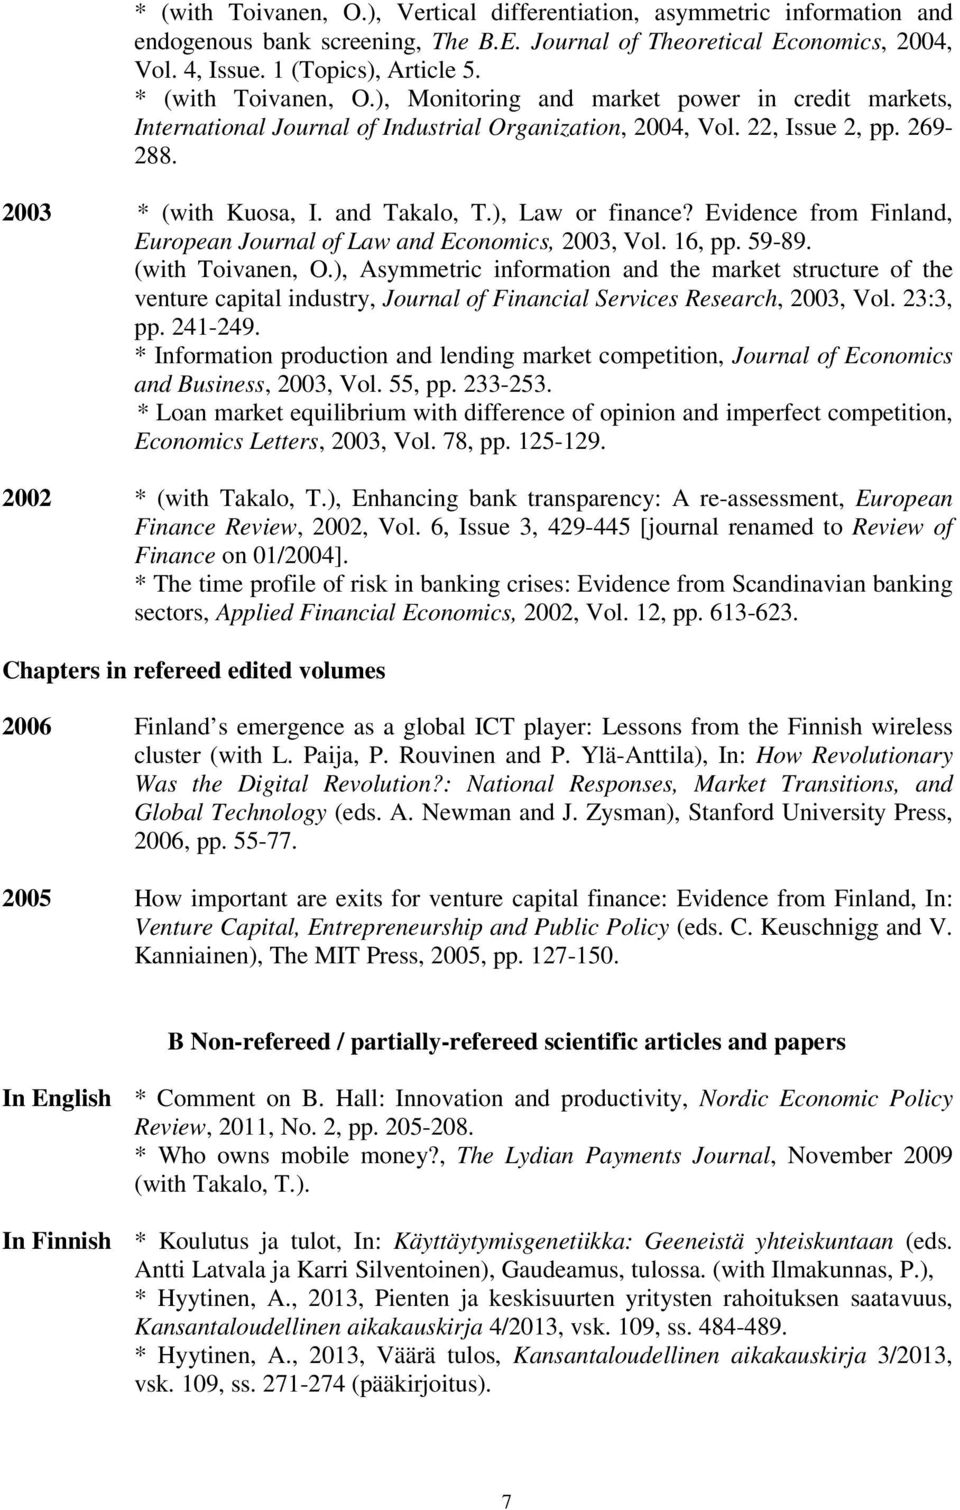 ), Law or finance? Evidence from Finland, European Journal of Law and Economics, 2003, Vol. 16, pp. 59-89. (with Toivanen, O.